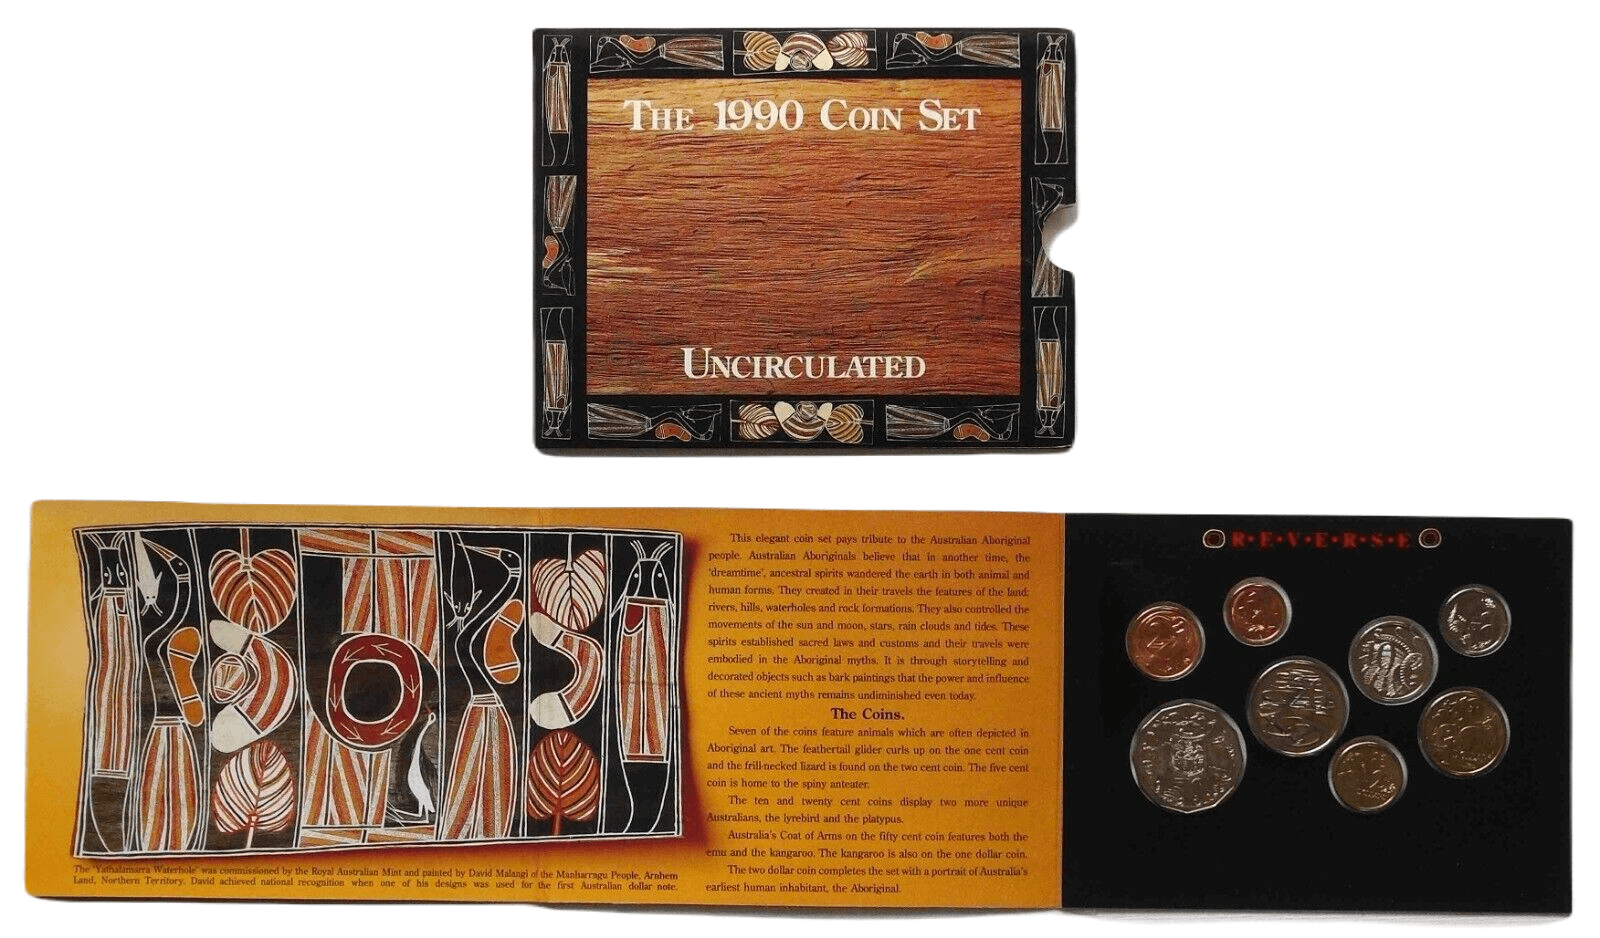 1990 Royal Australian Mint Uncirculated Coin Set - Loose Change Coins